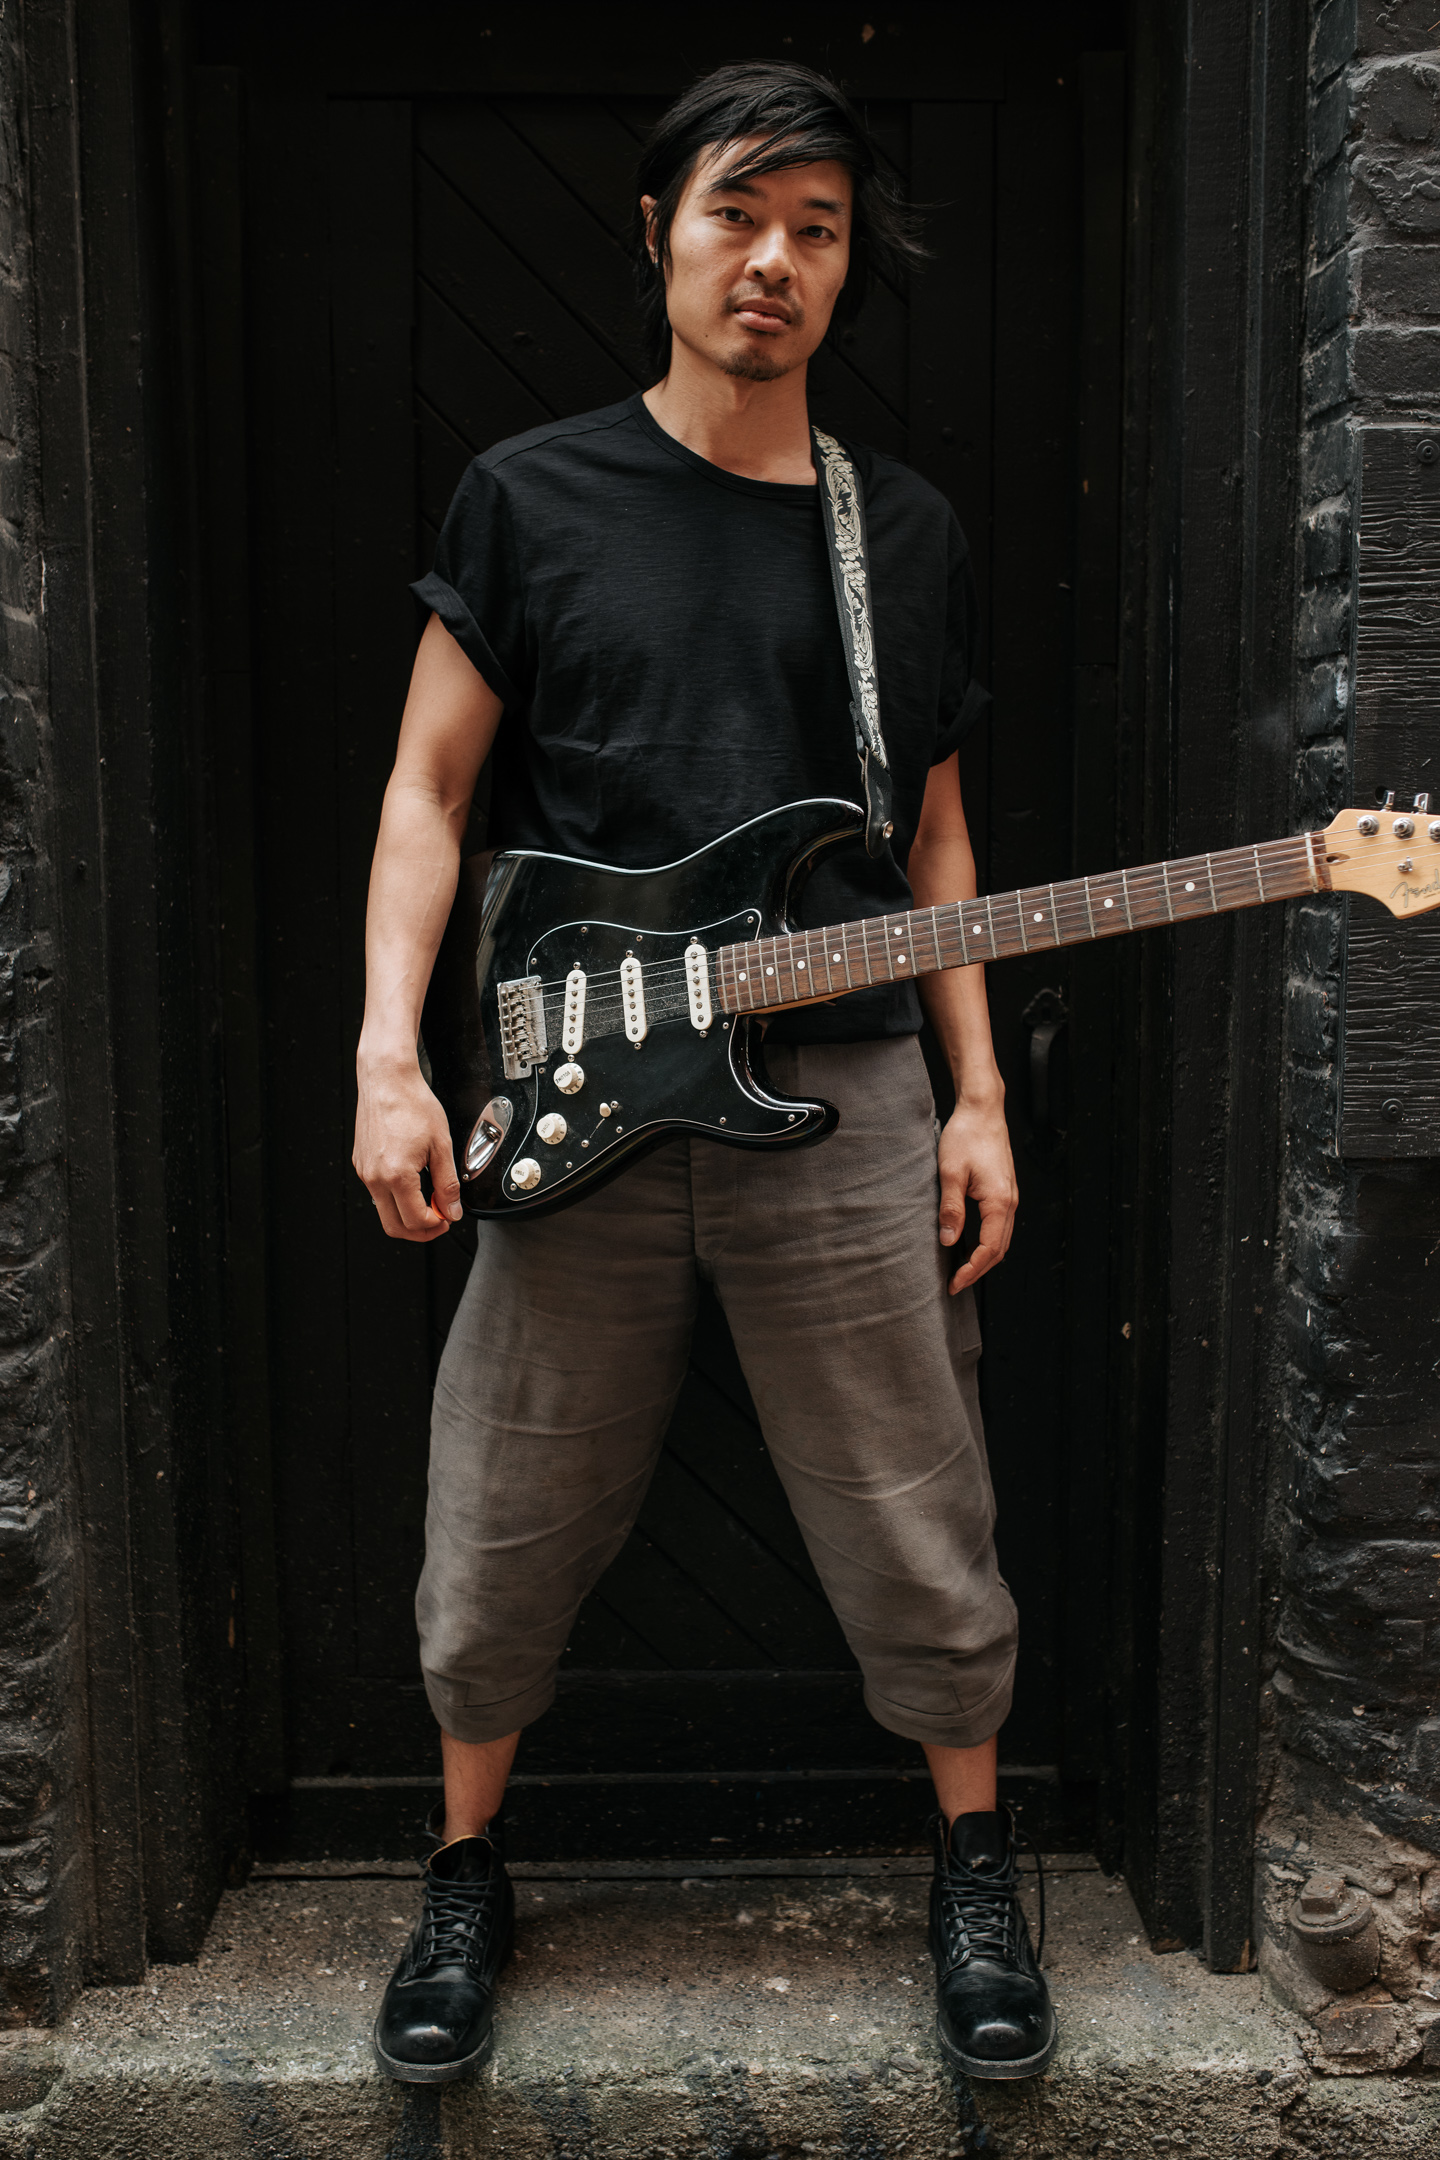 Portrait of Daniel Lew, standing in a wide stance with a black electric guitar.